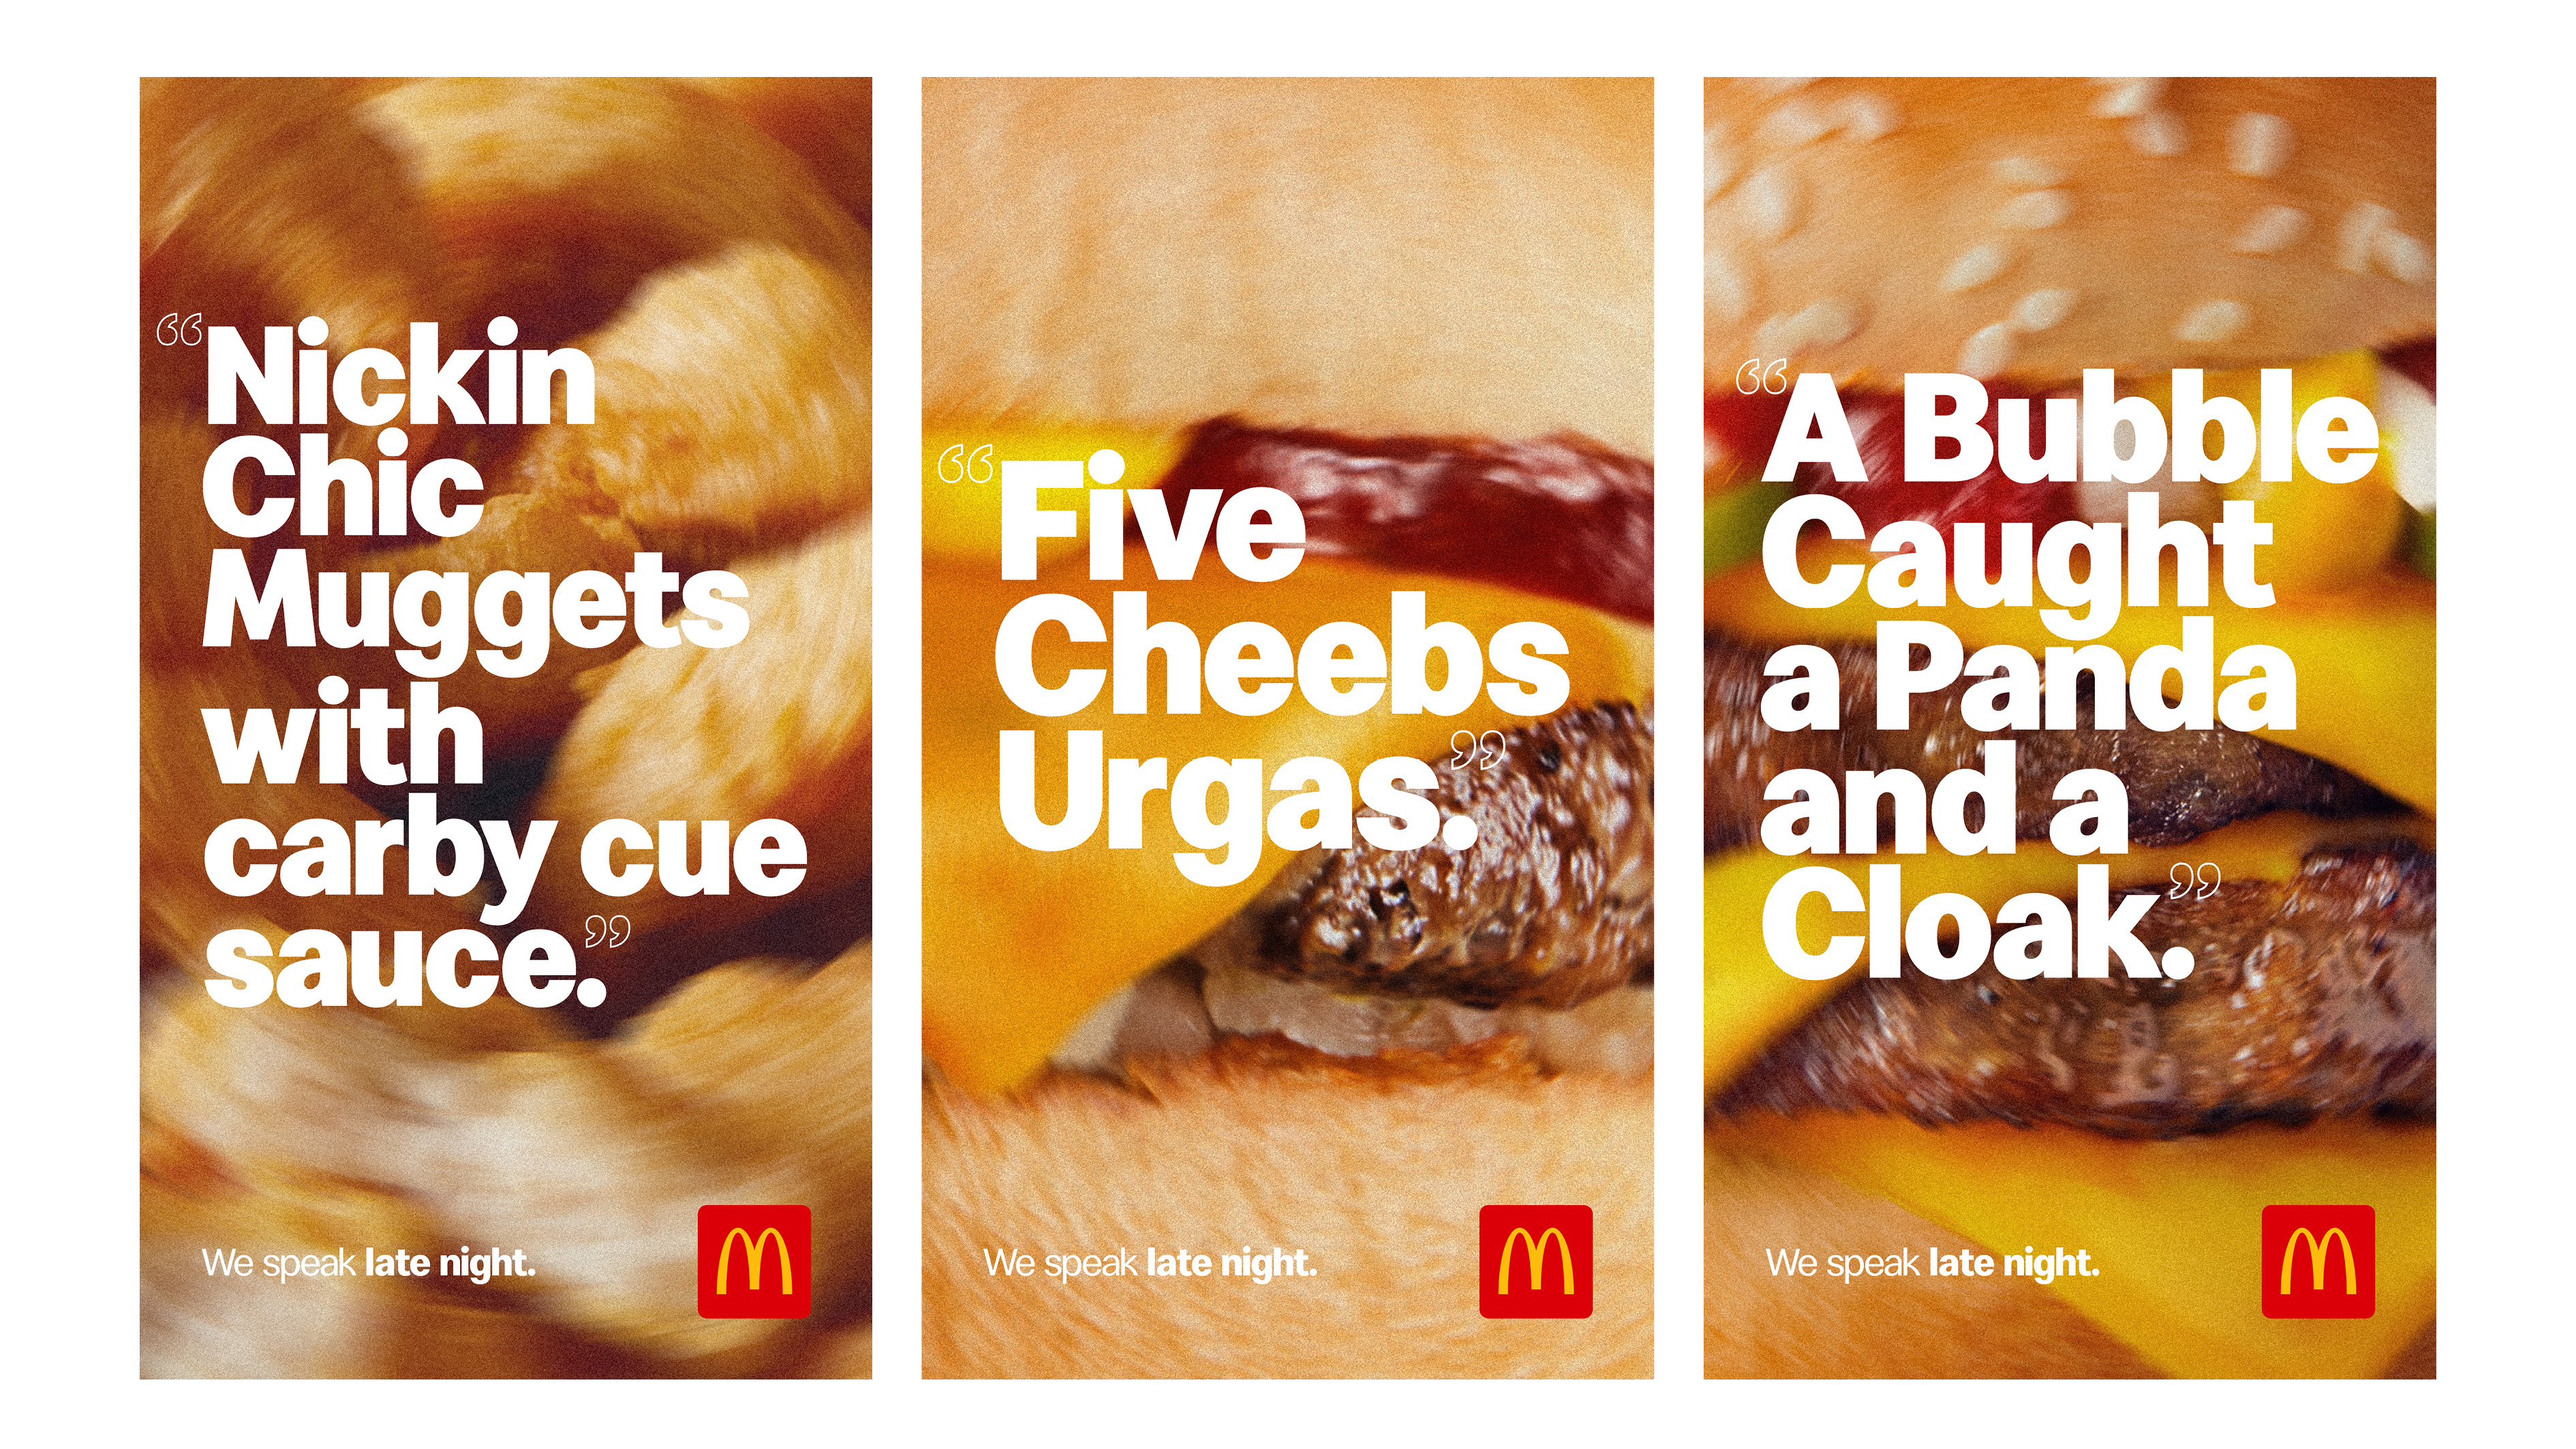 Maccas and DDB Aotearoa Assure Us They Speak "Late Night"